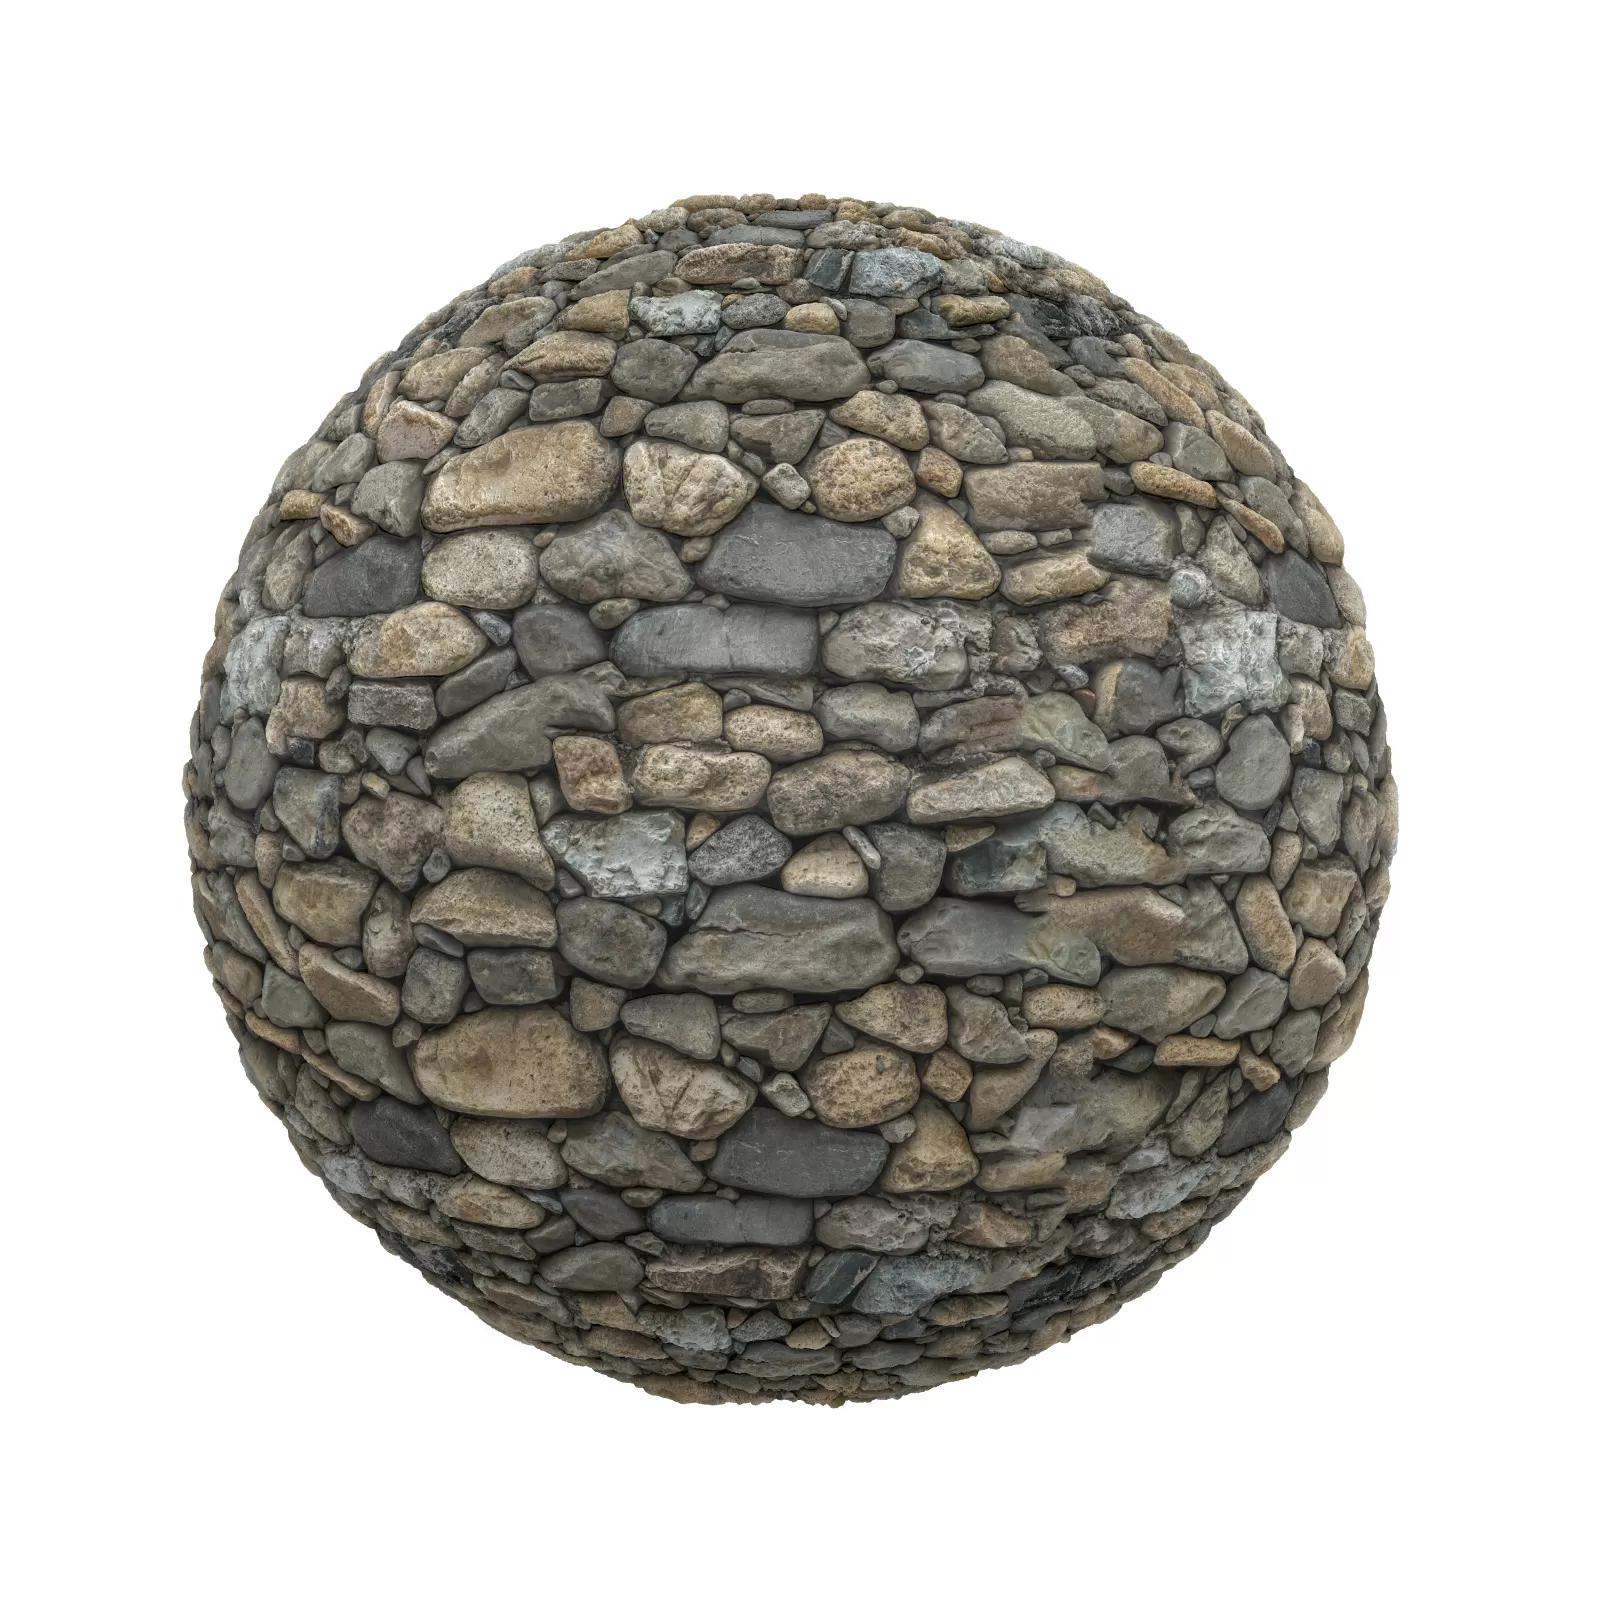 TEXTURES – STONES – CGAxis PBR Colection Vol 1 Stones – stone pavement